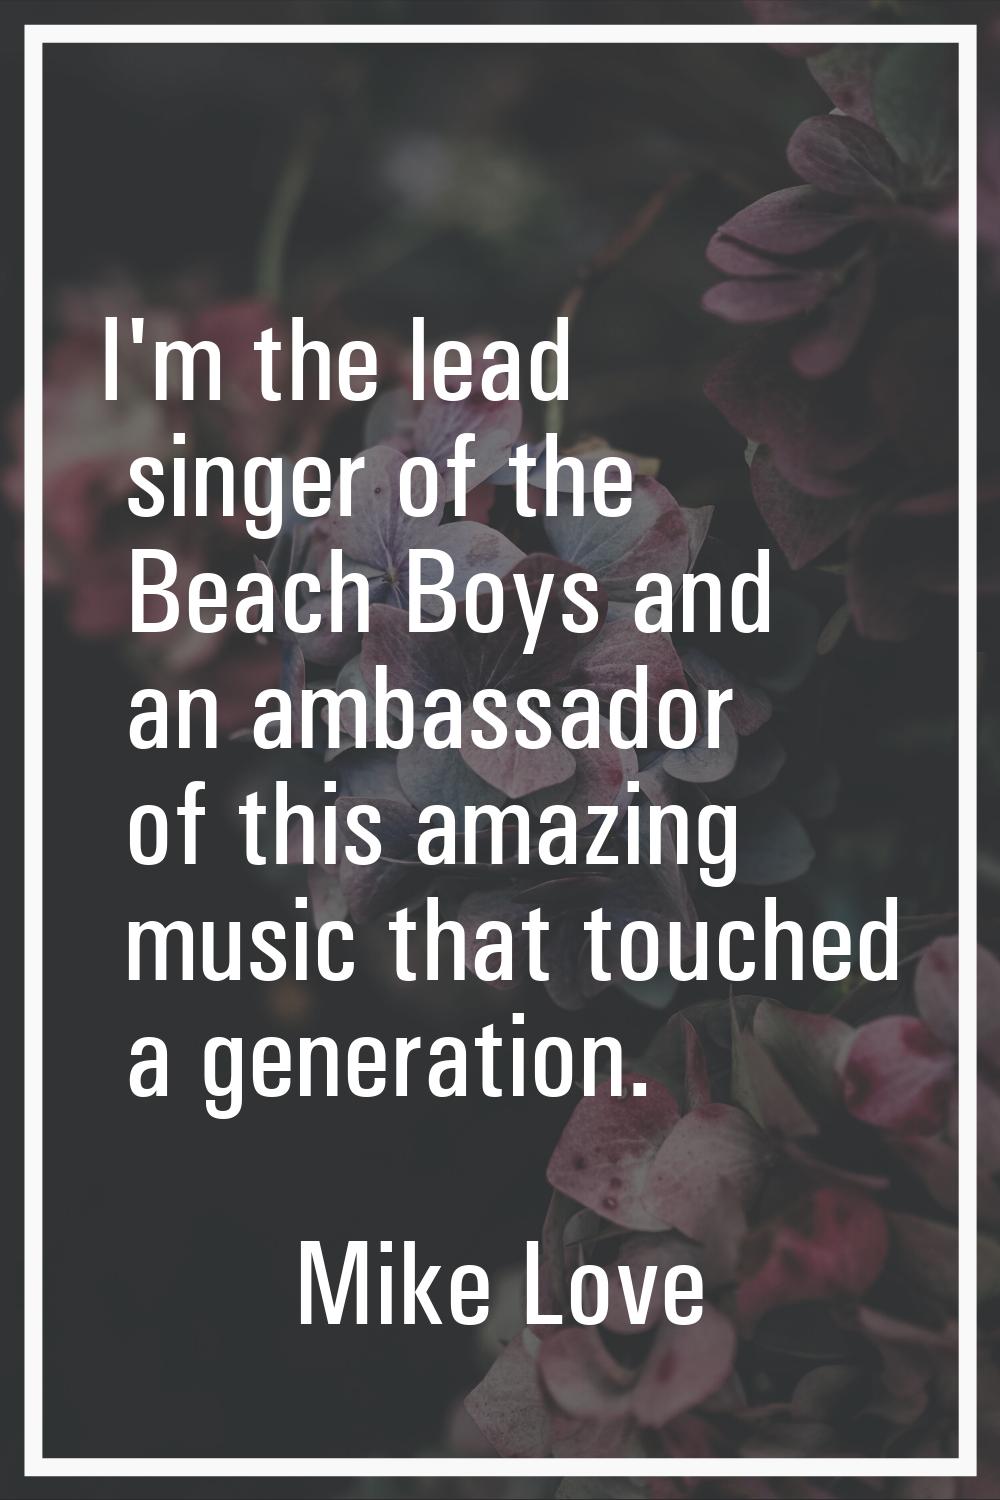 I'm the lead singer of the Beach Boys and an ambassador of this amazing music that touched a genera